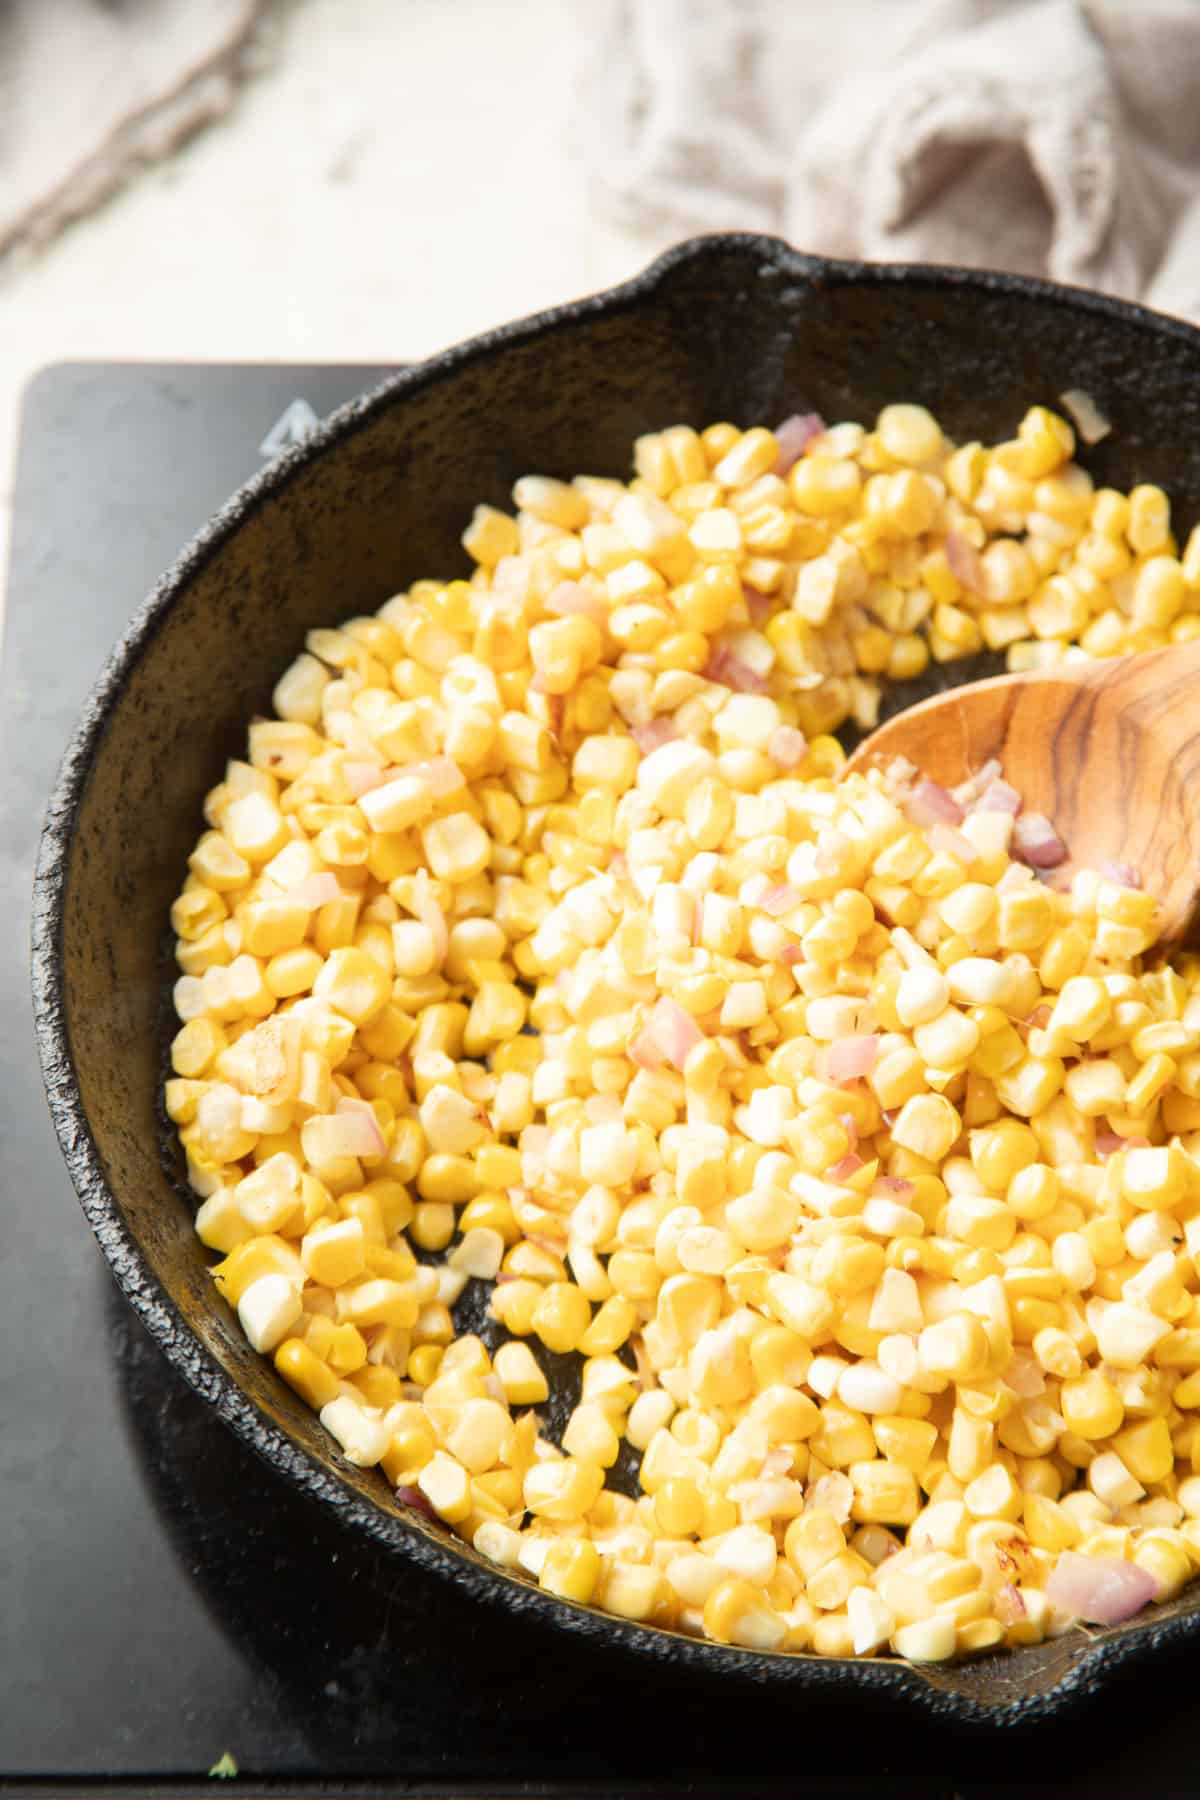 Corn cooking in a skillet.